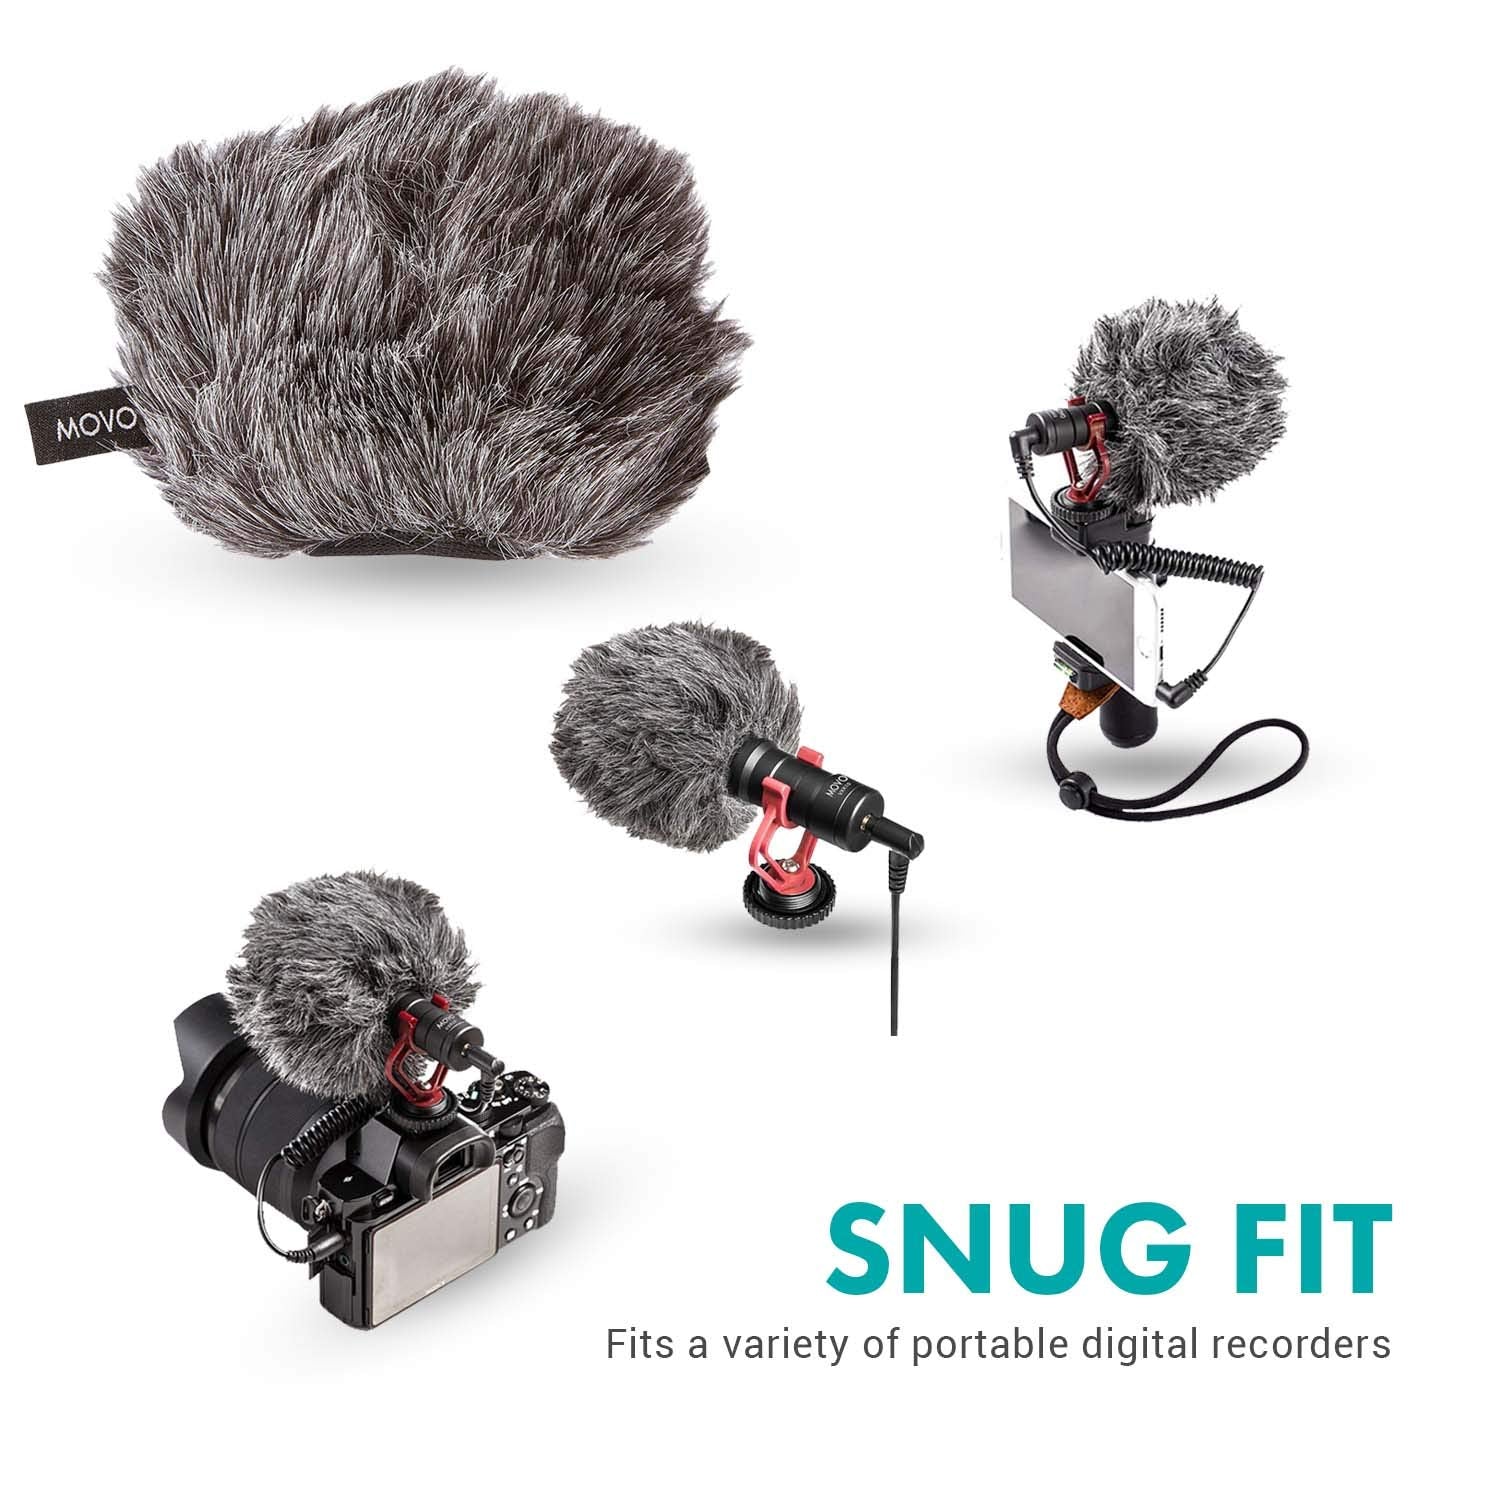 Movo WS-G9 Furry Outdoor Microphone Windscreen Muff for Portable Digital Recorders up to 3" X 1.5" (W x D) - Fits the Zoom H4n, H4n PRO, H5, H6, Tascam DR-40, DR-05, DR-07 and More (Dark Gray)  - Very Good